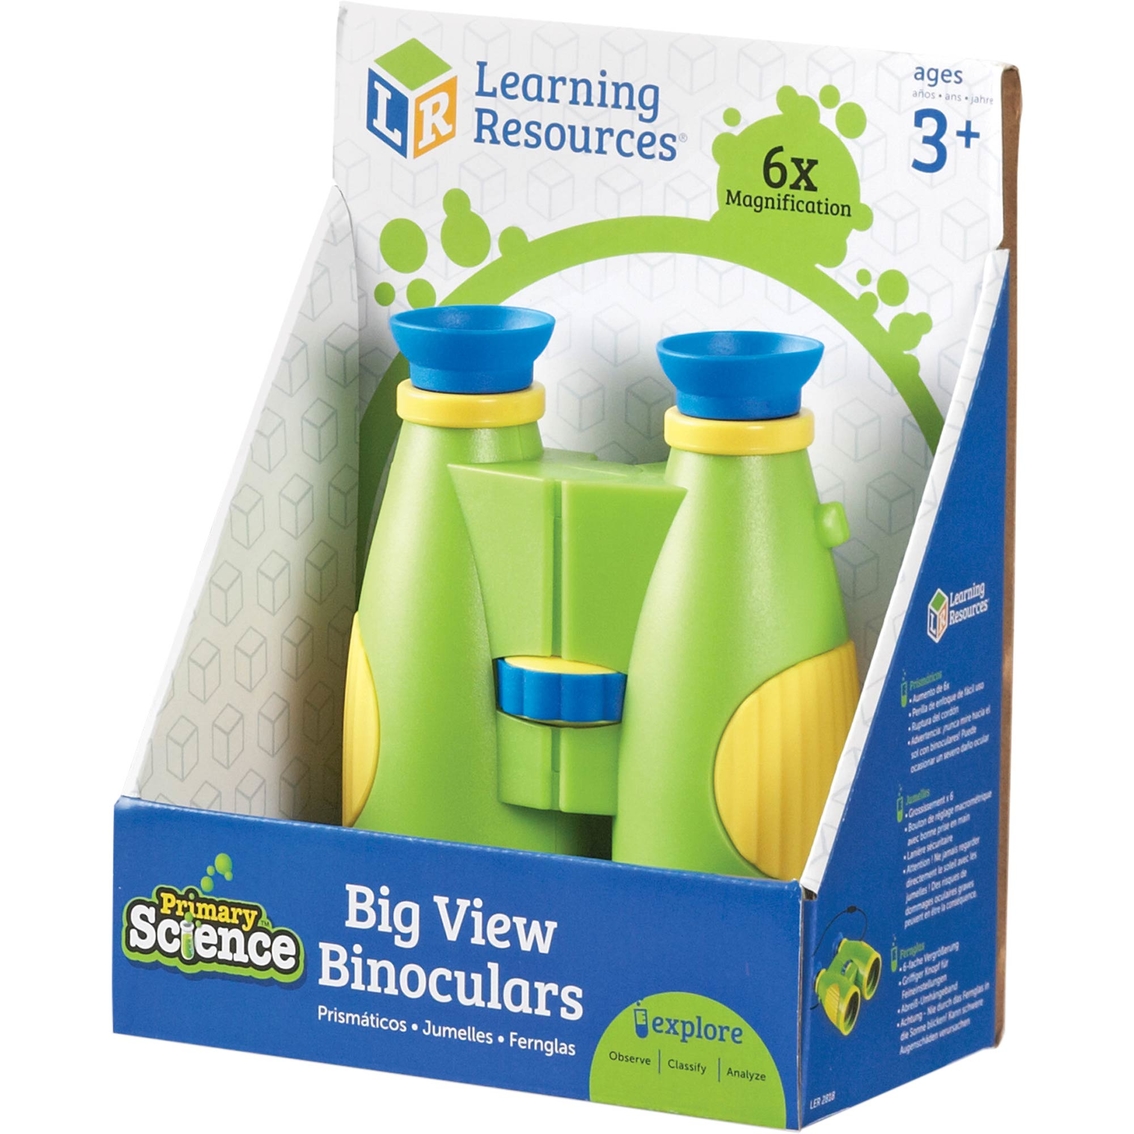 Learning Resources Primary Science Big View Binoculars - Image 2 of 2